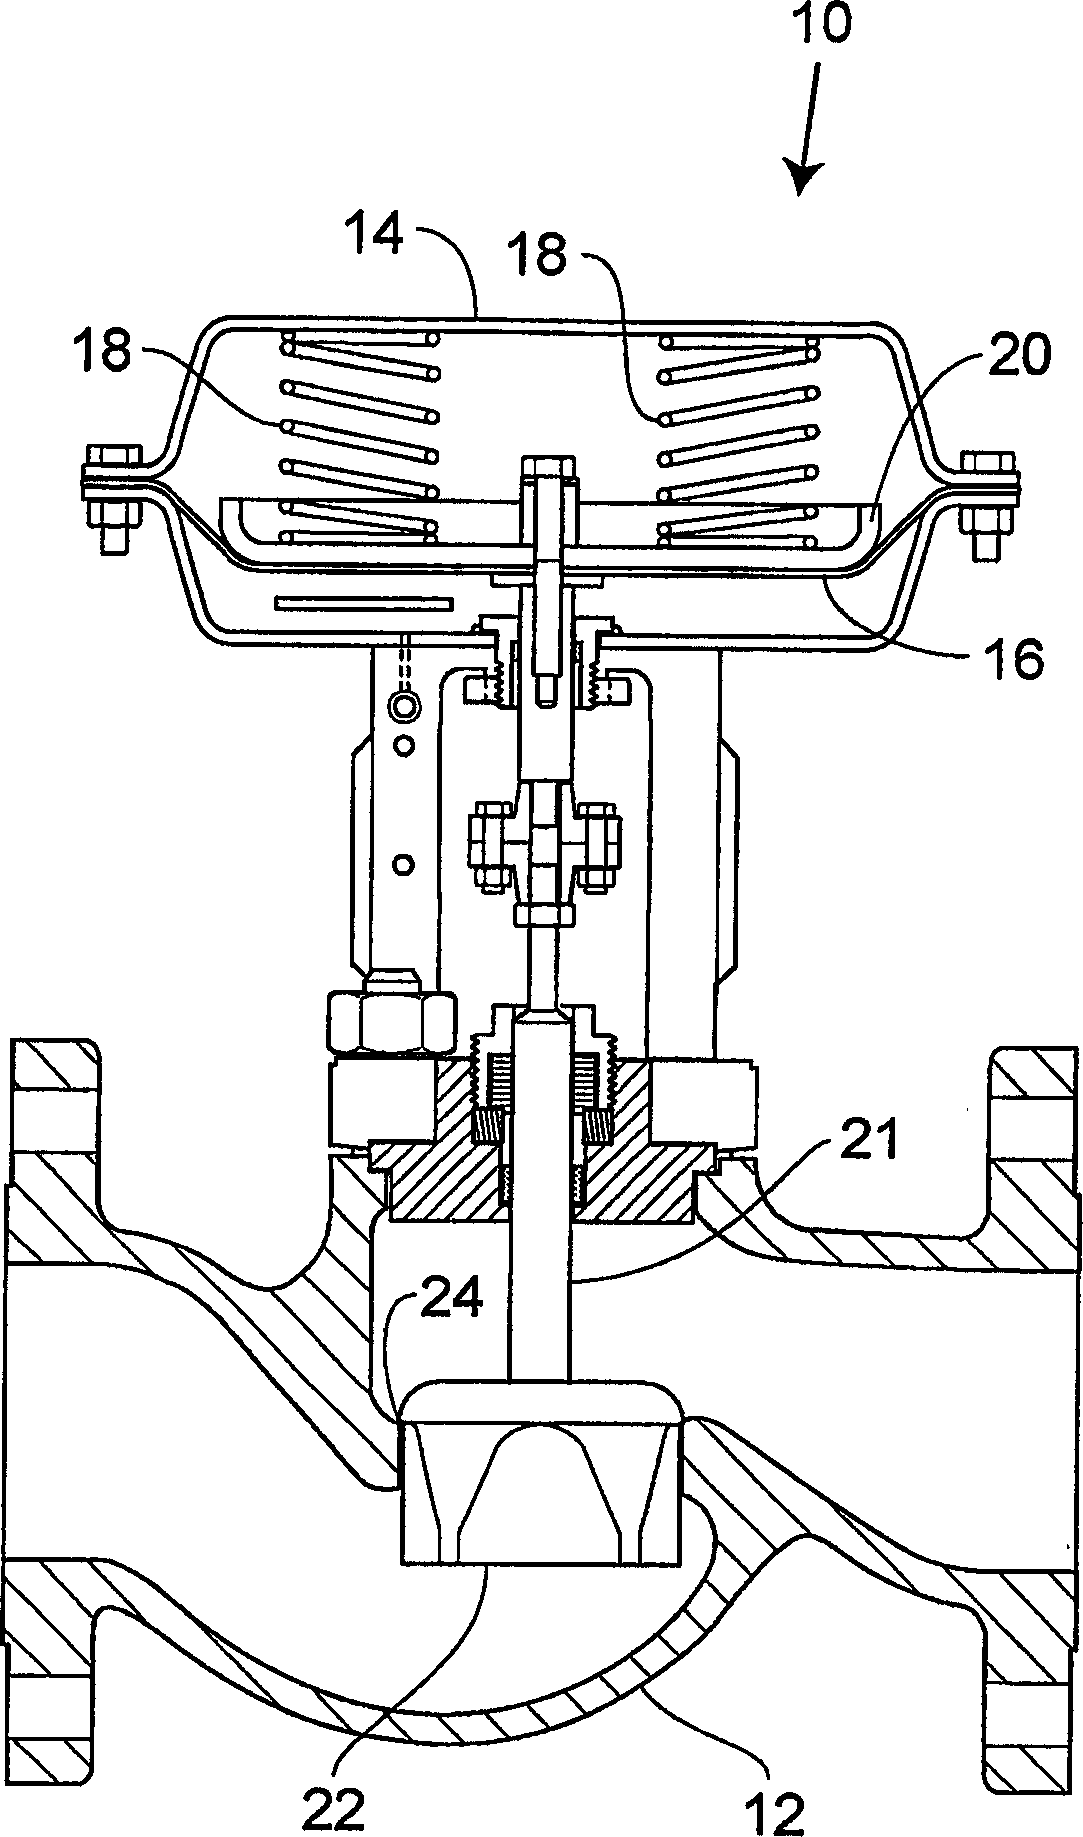 Vulcanized rubber composition and articles manufactured therefrom